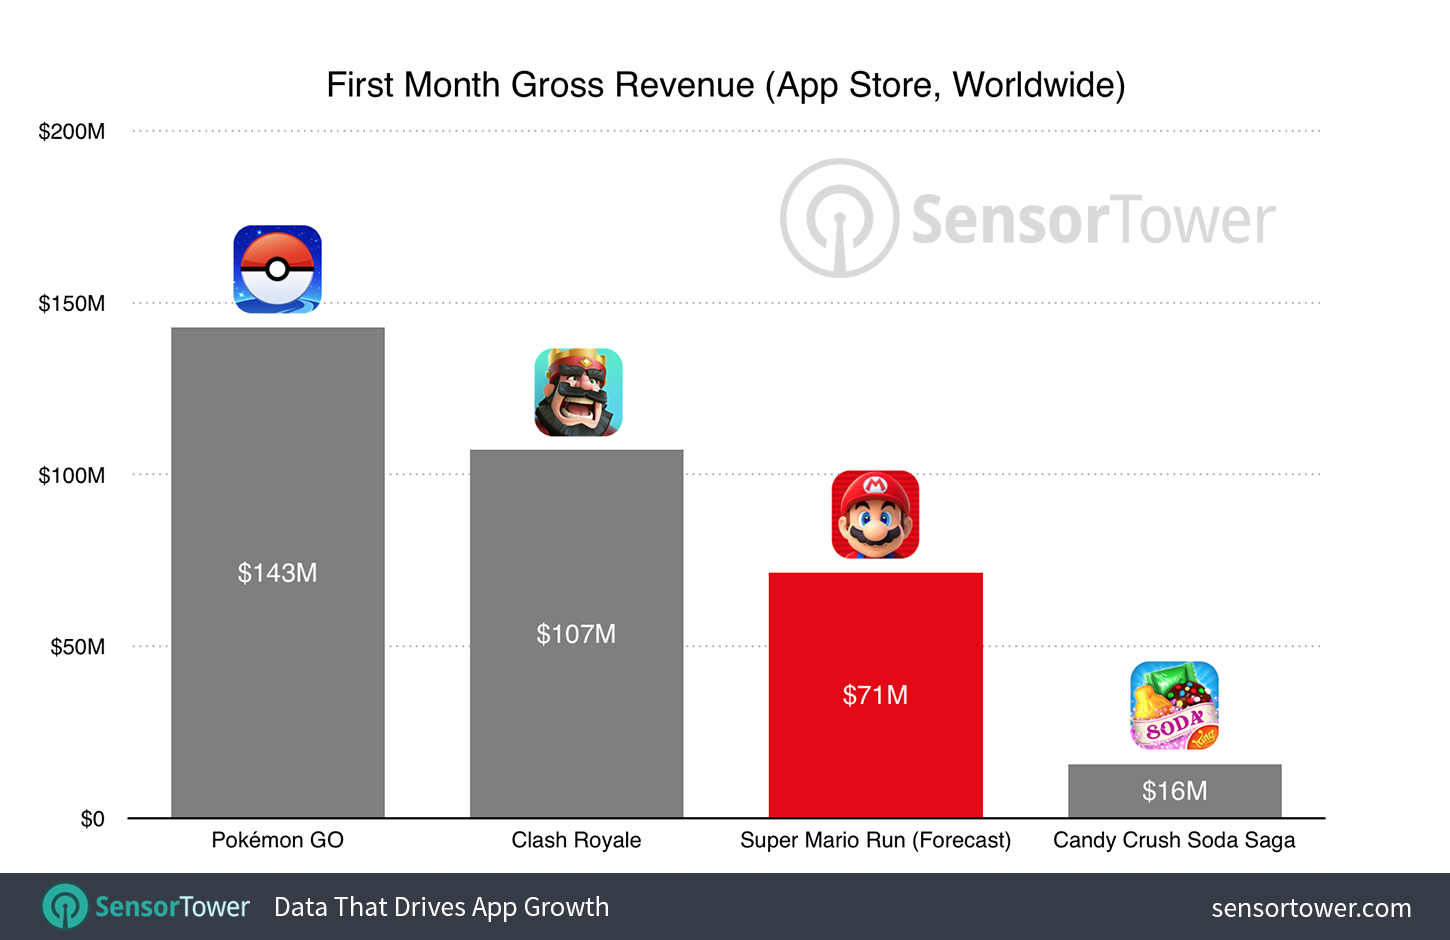 Super Mario Run projected to rake in over $70 million in revenue during first month